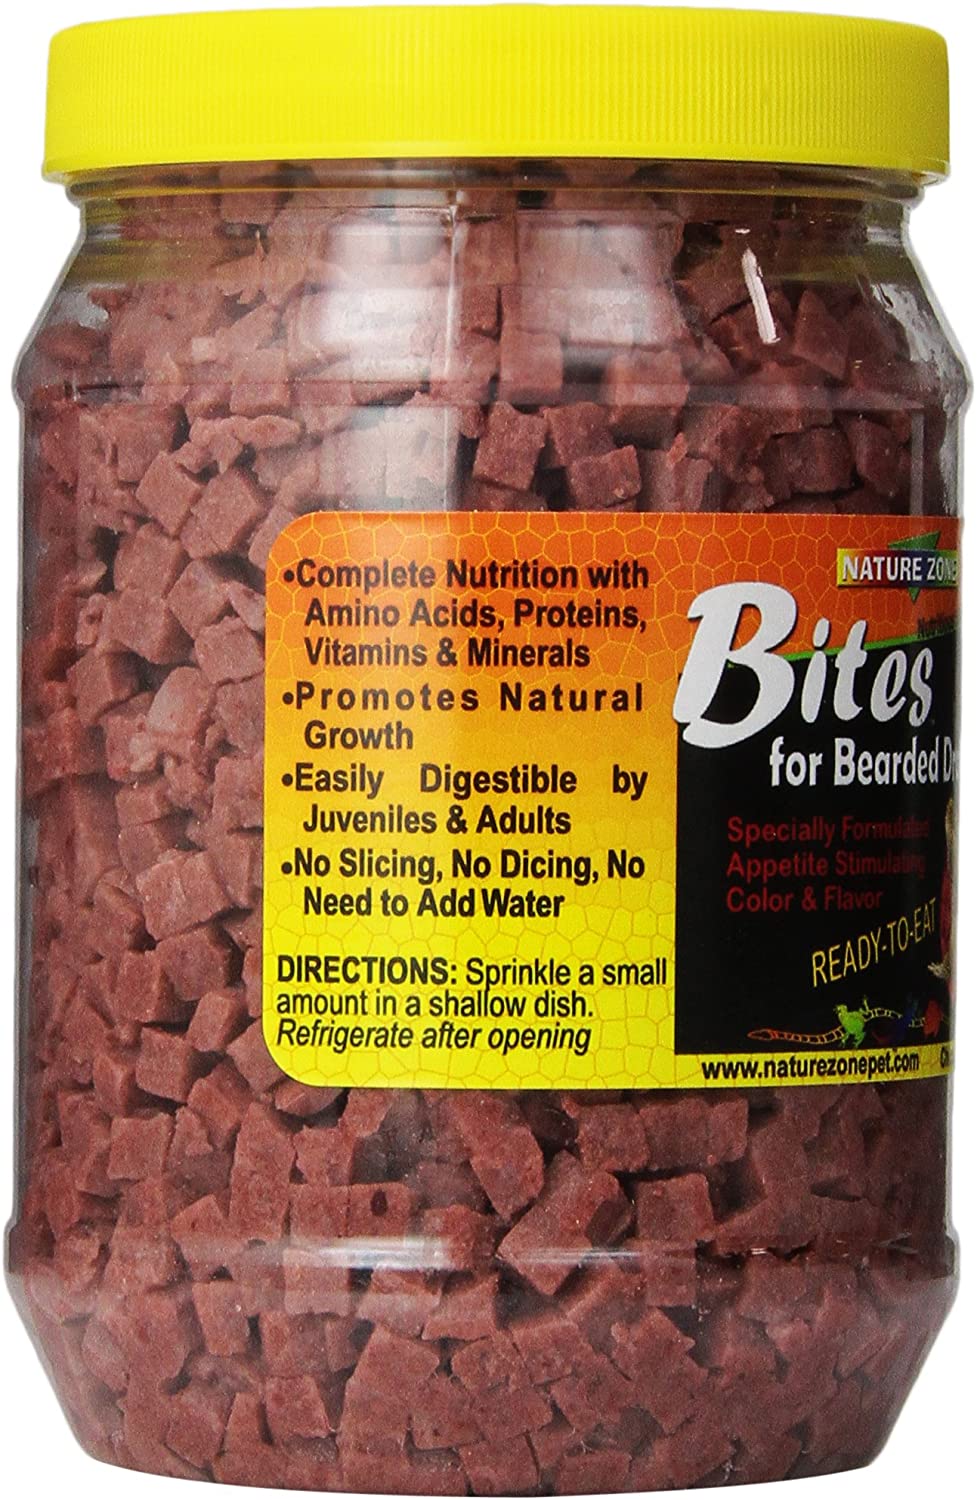 Nature Zone Bites For Bearded Dragons, Soft Moist Food, 24-Ounce